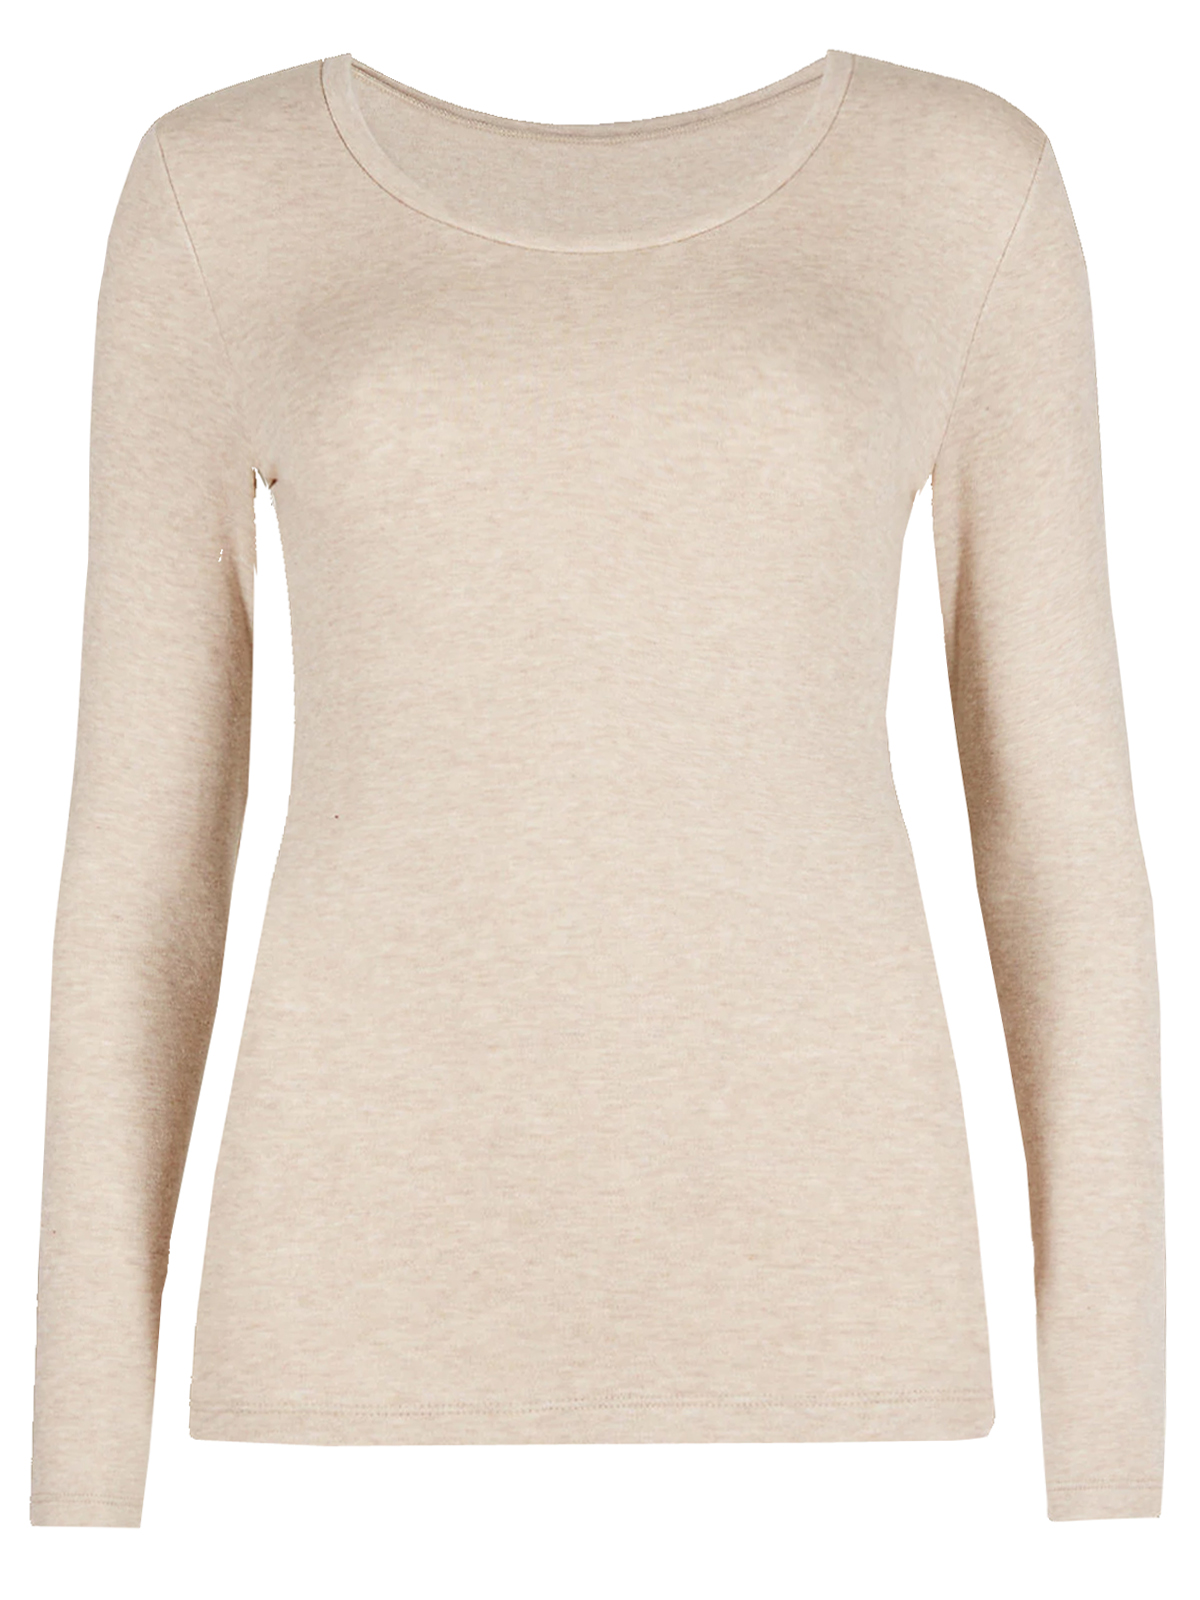 Marks and Spencer - - M&5 OATMEAL Heatgen Thermal Long Sleeve Top ...